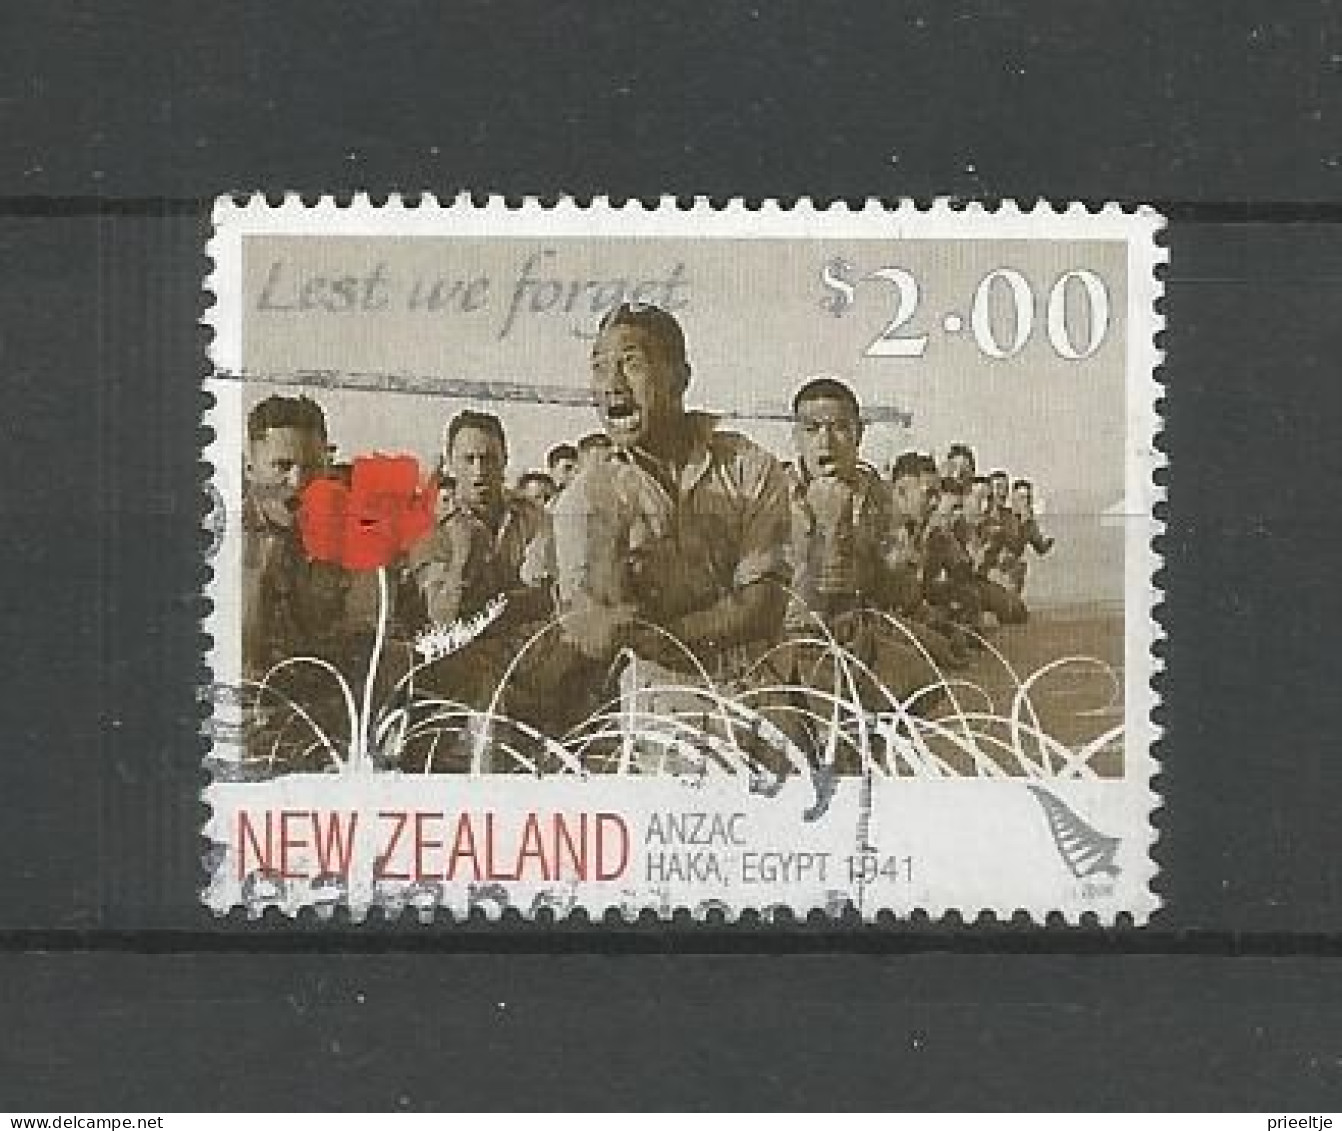 New Zealand 2008 Lest We Forget Y.T. 2396 (0) - Used Stamps